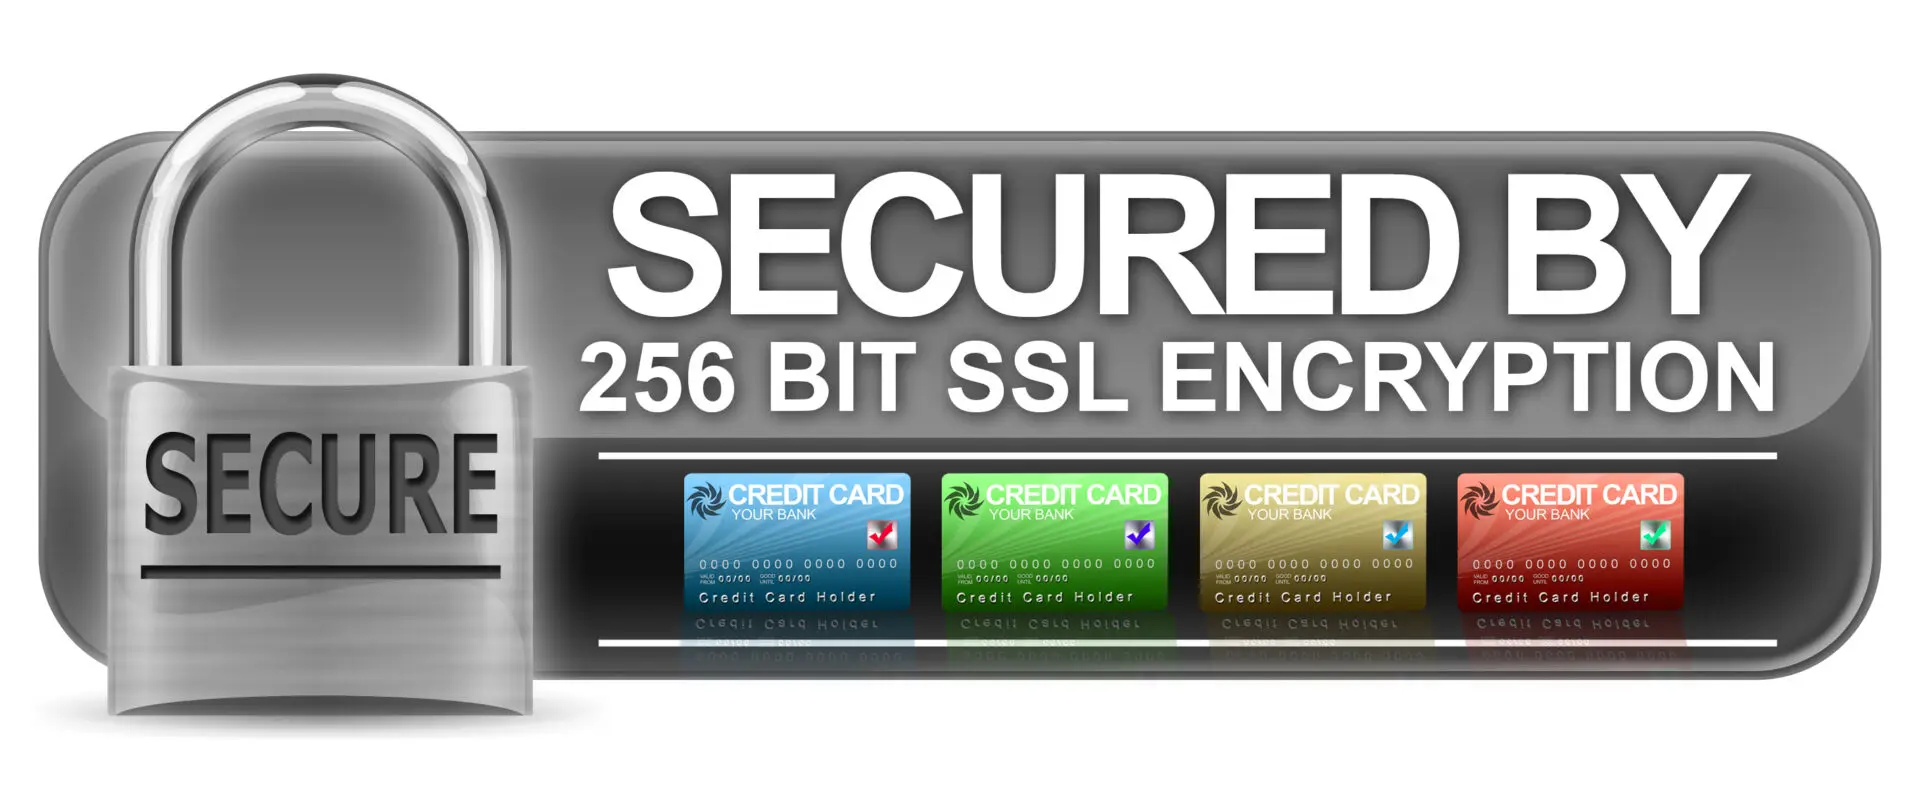 A picture of the secured 2 5 6 bit ssl encryption.